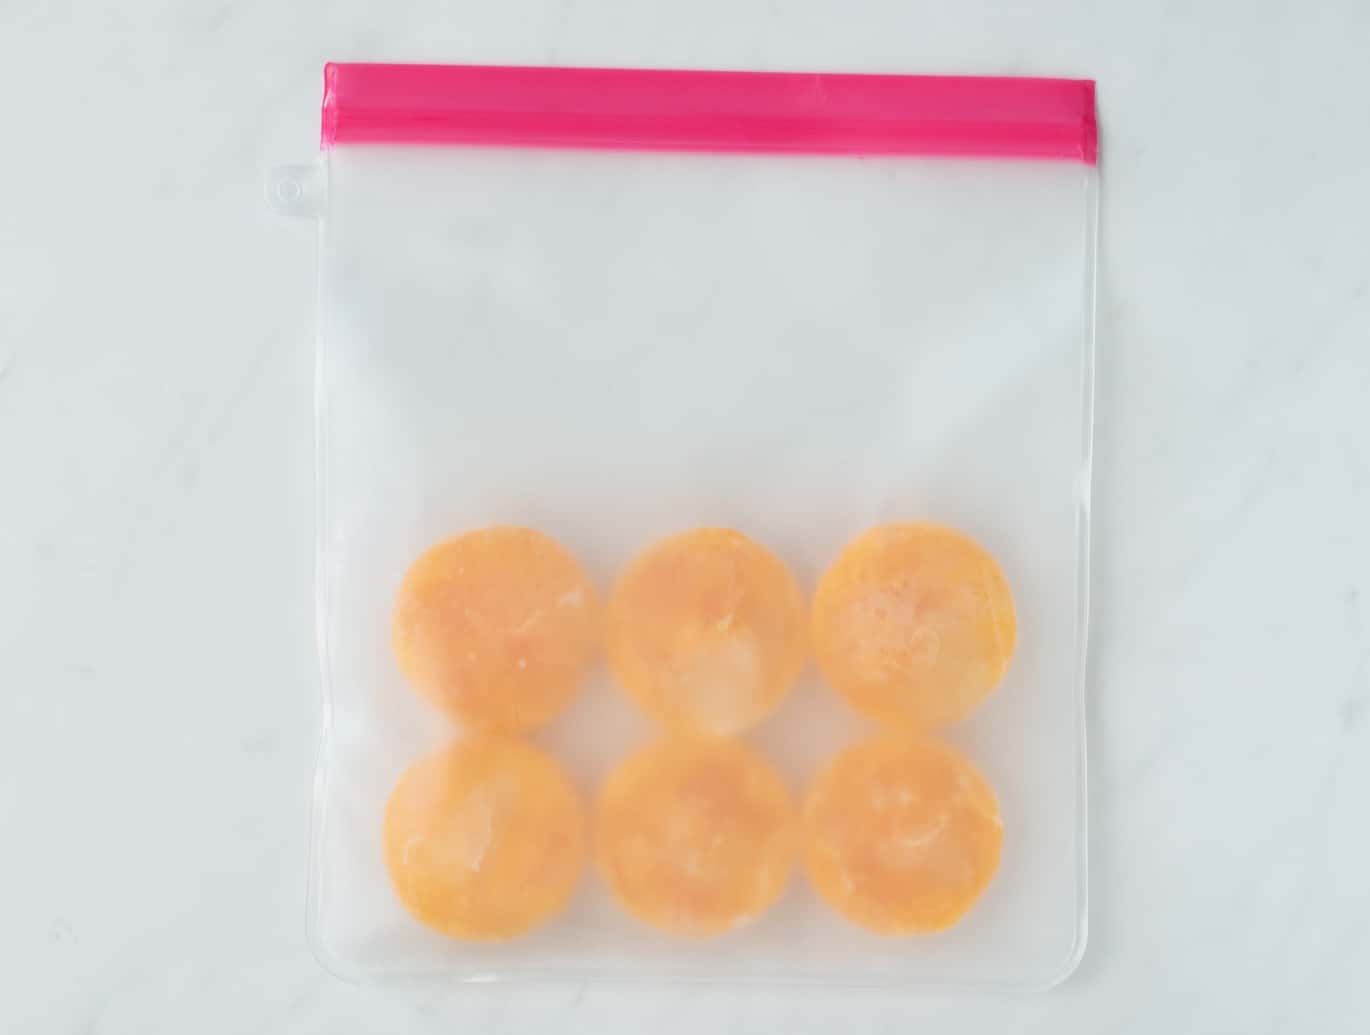 Freezing eggs - Six frozen eggs in a resealable bag sitting on a white counter.